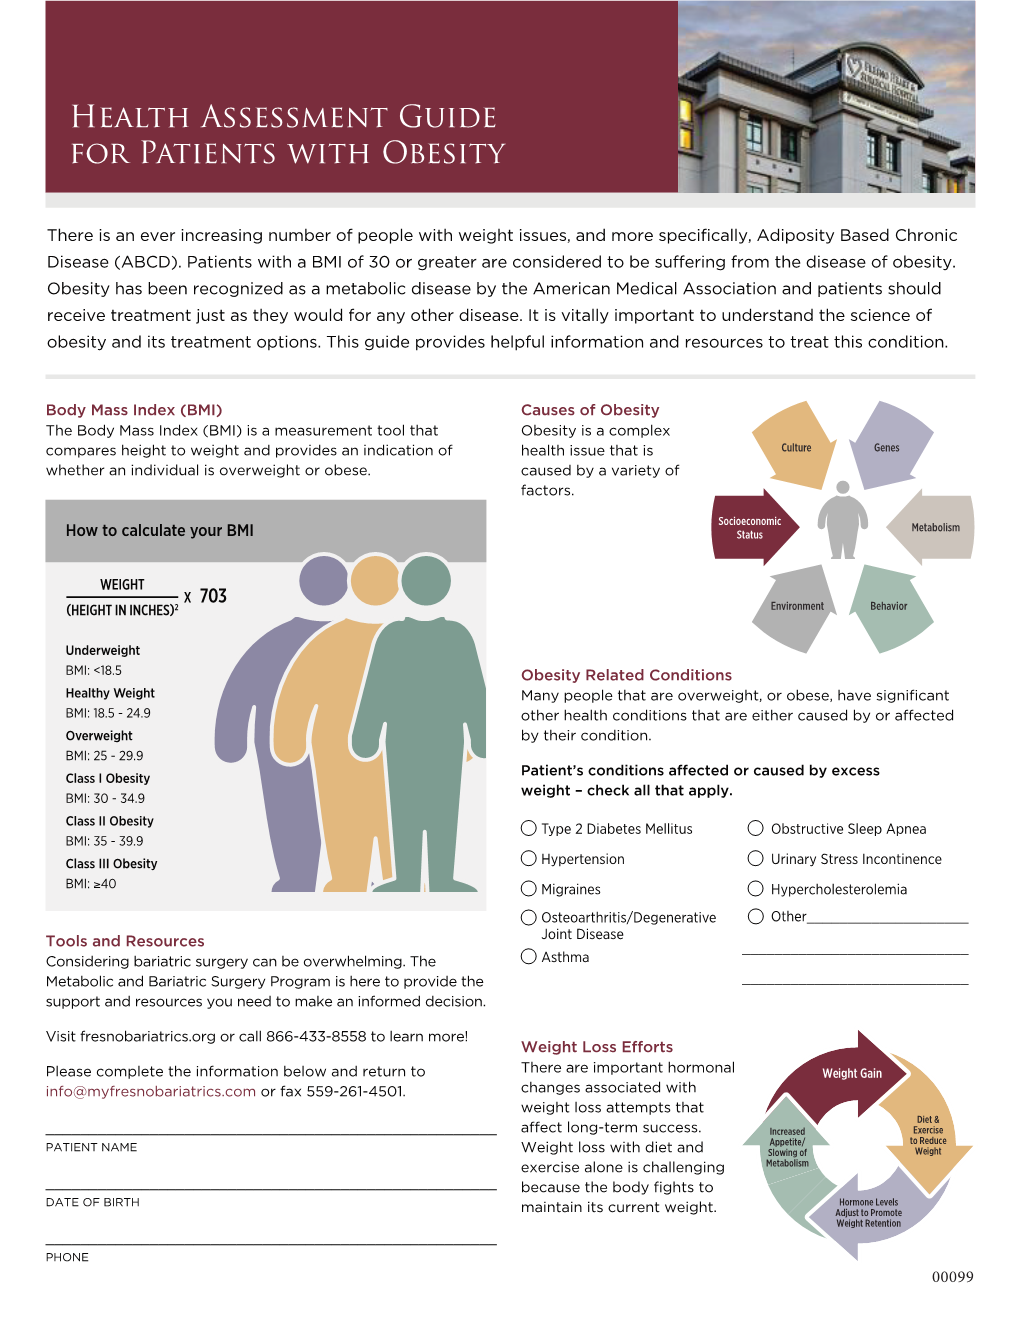 Health Assessment Guide for Patients with Obesity